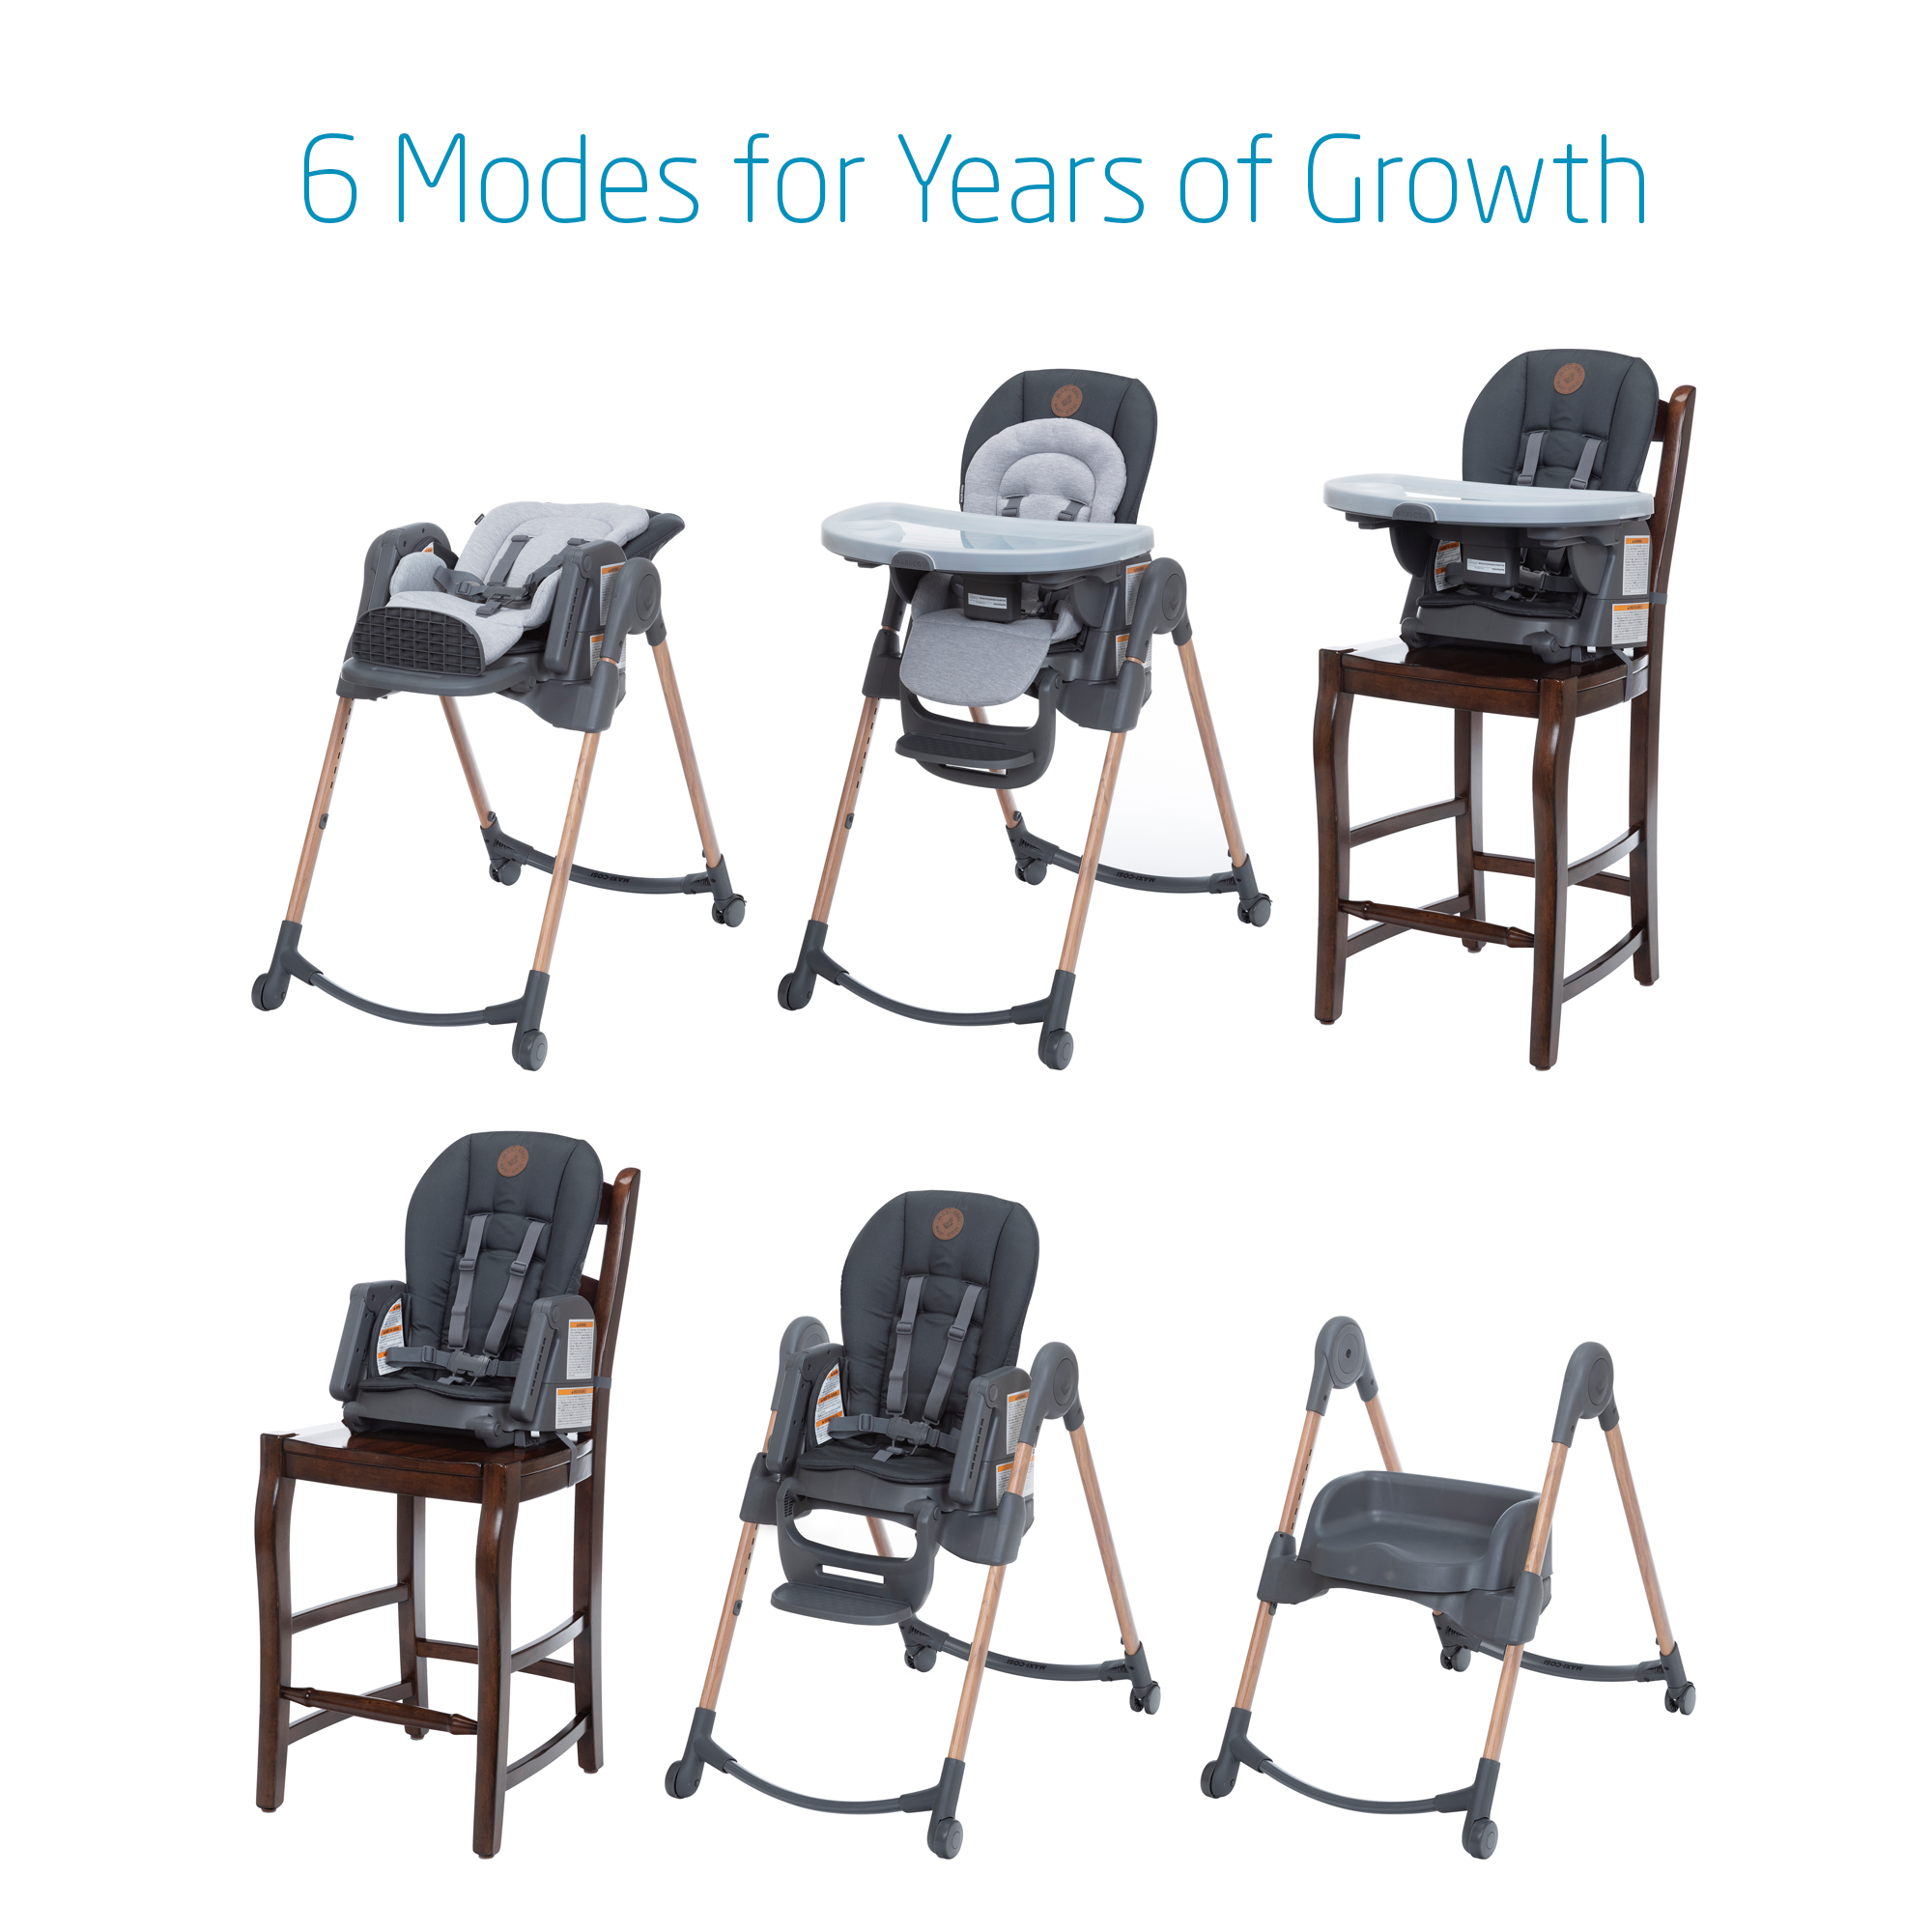 6 Modes for years of growth